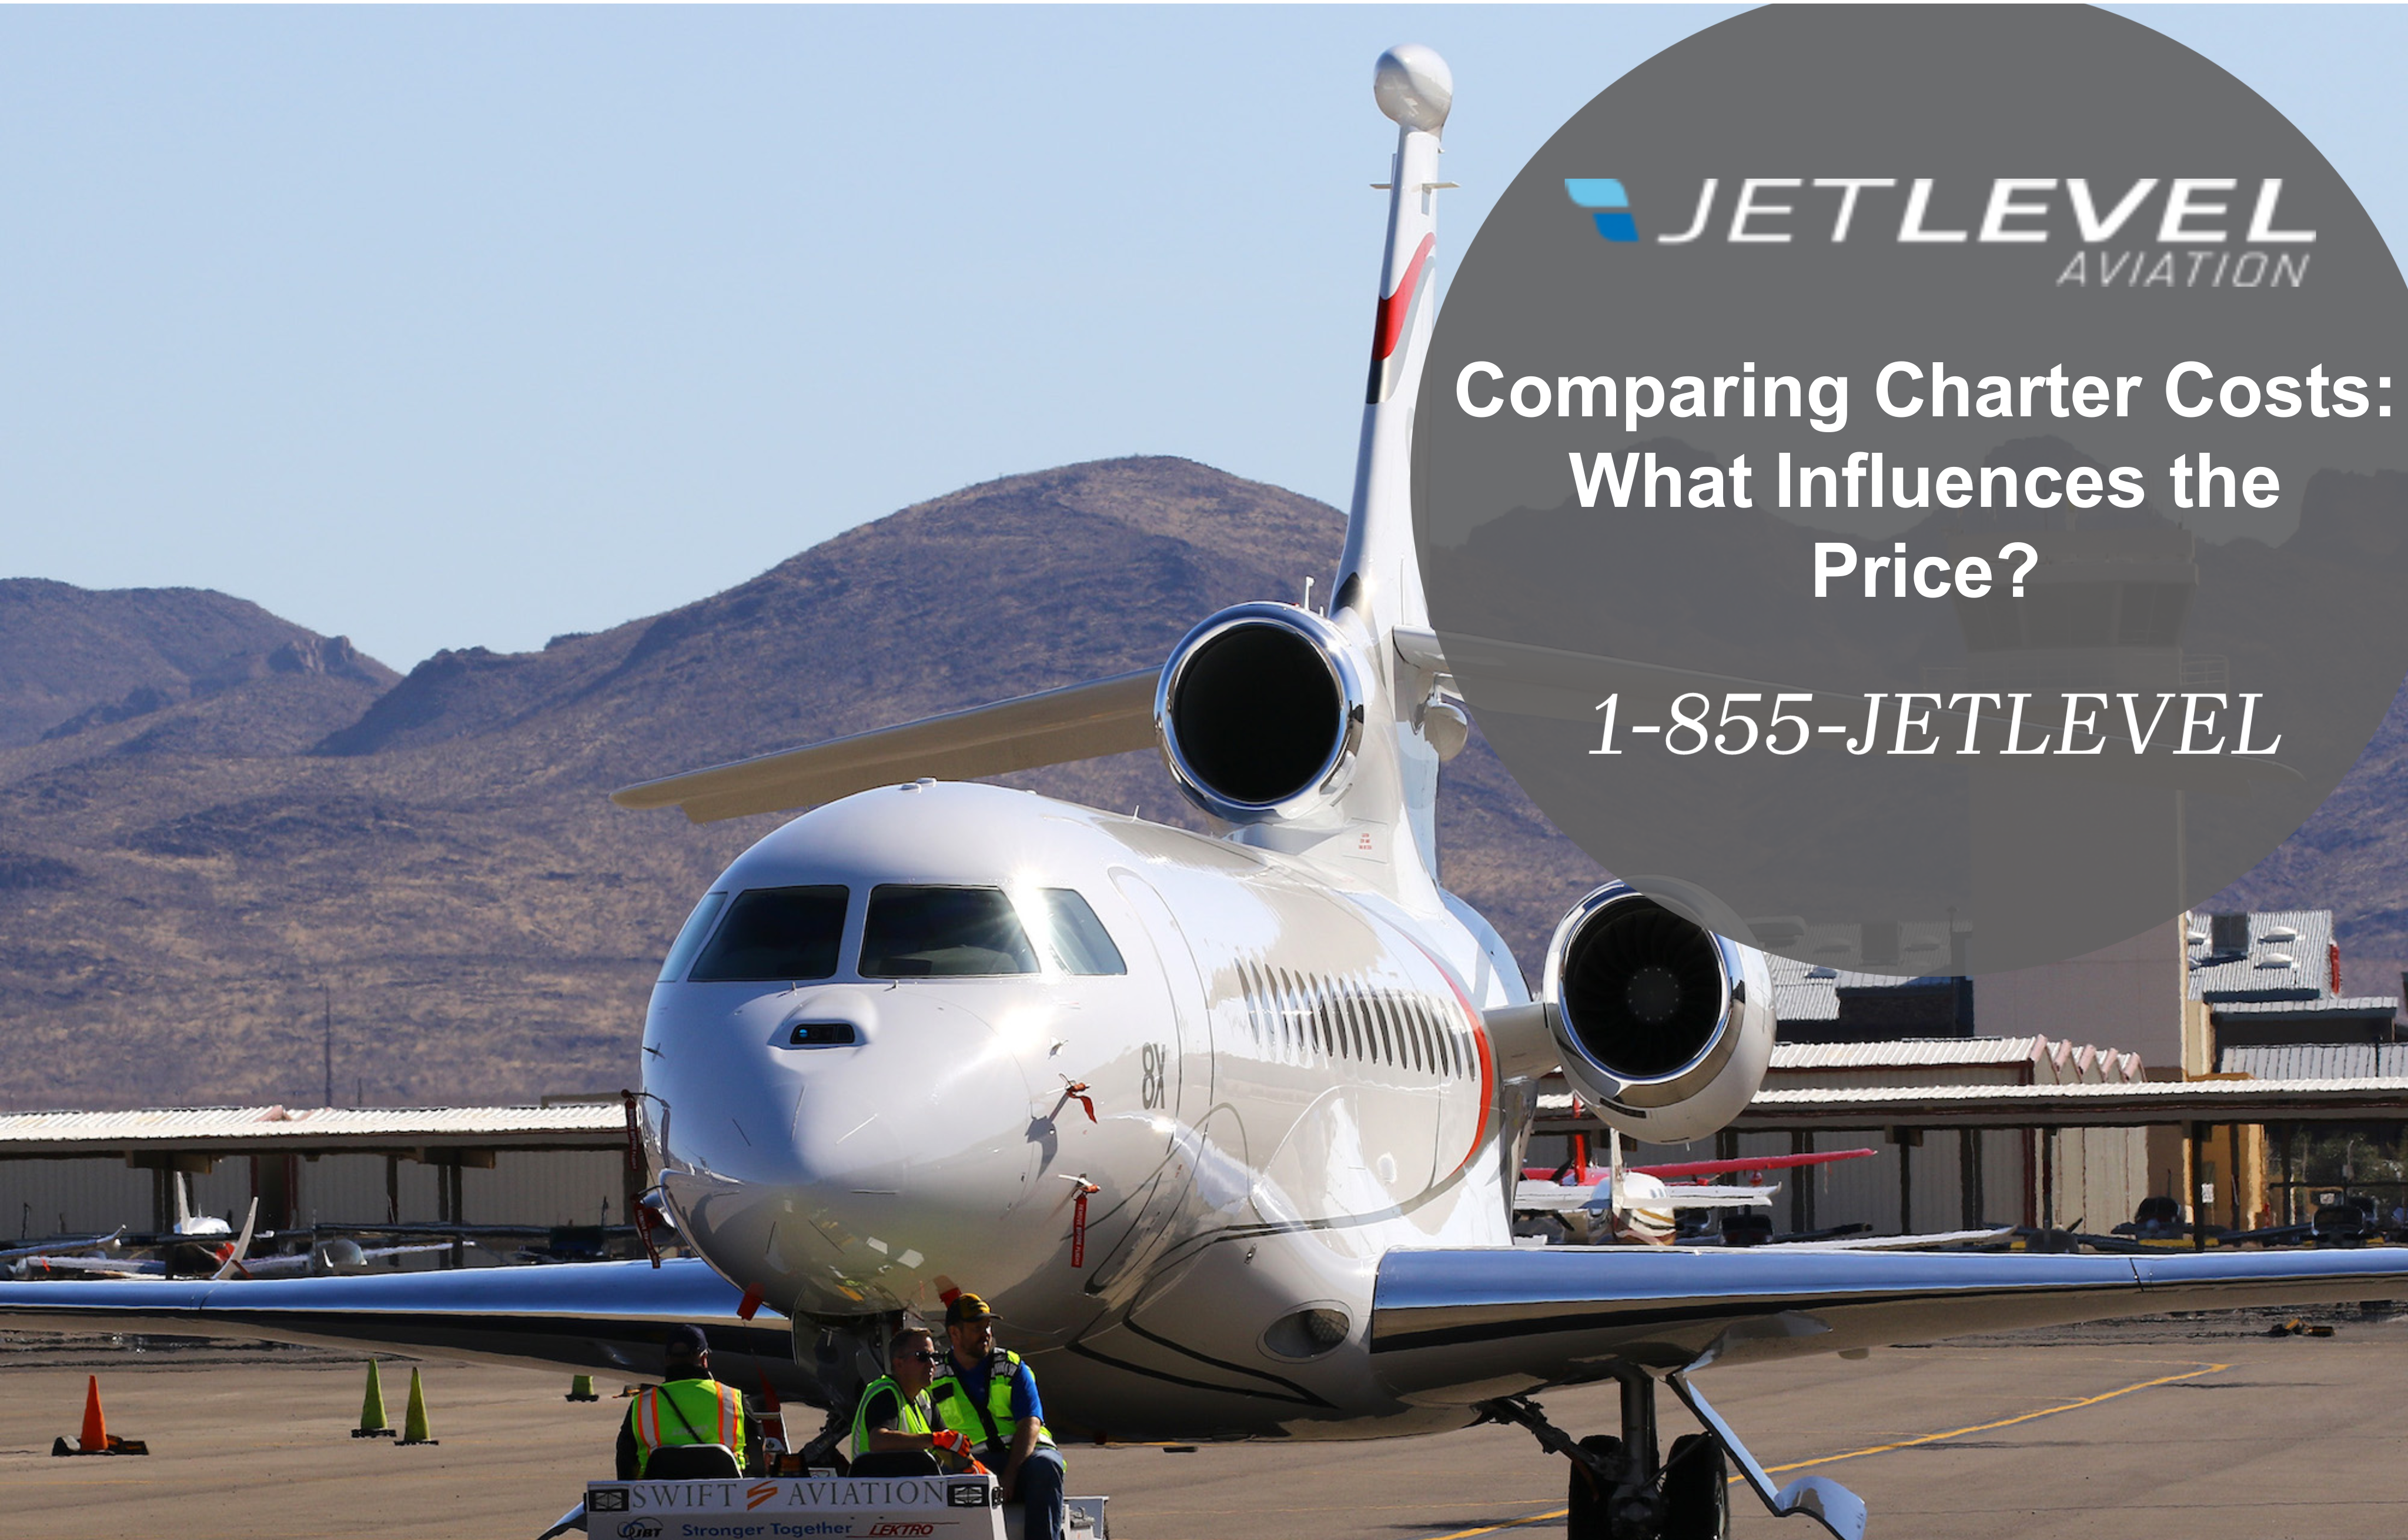 Comparing Charter Costs: What Influences the Price?